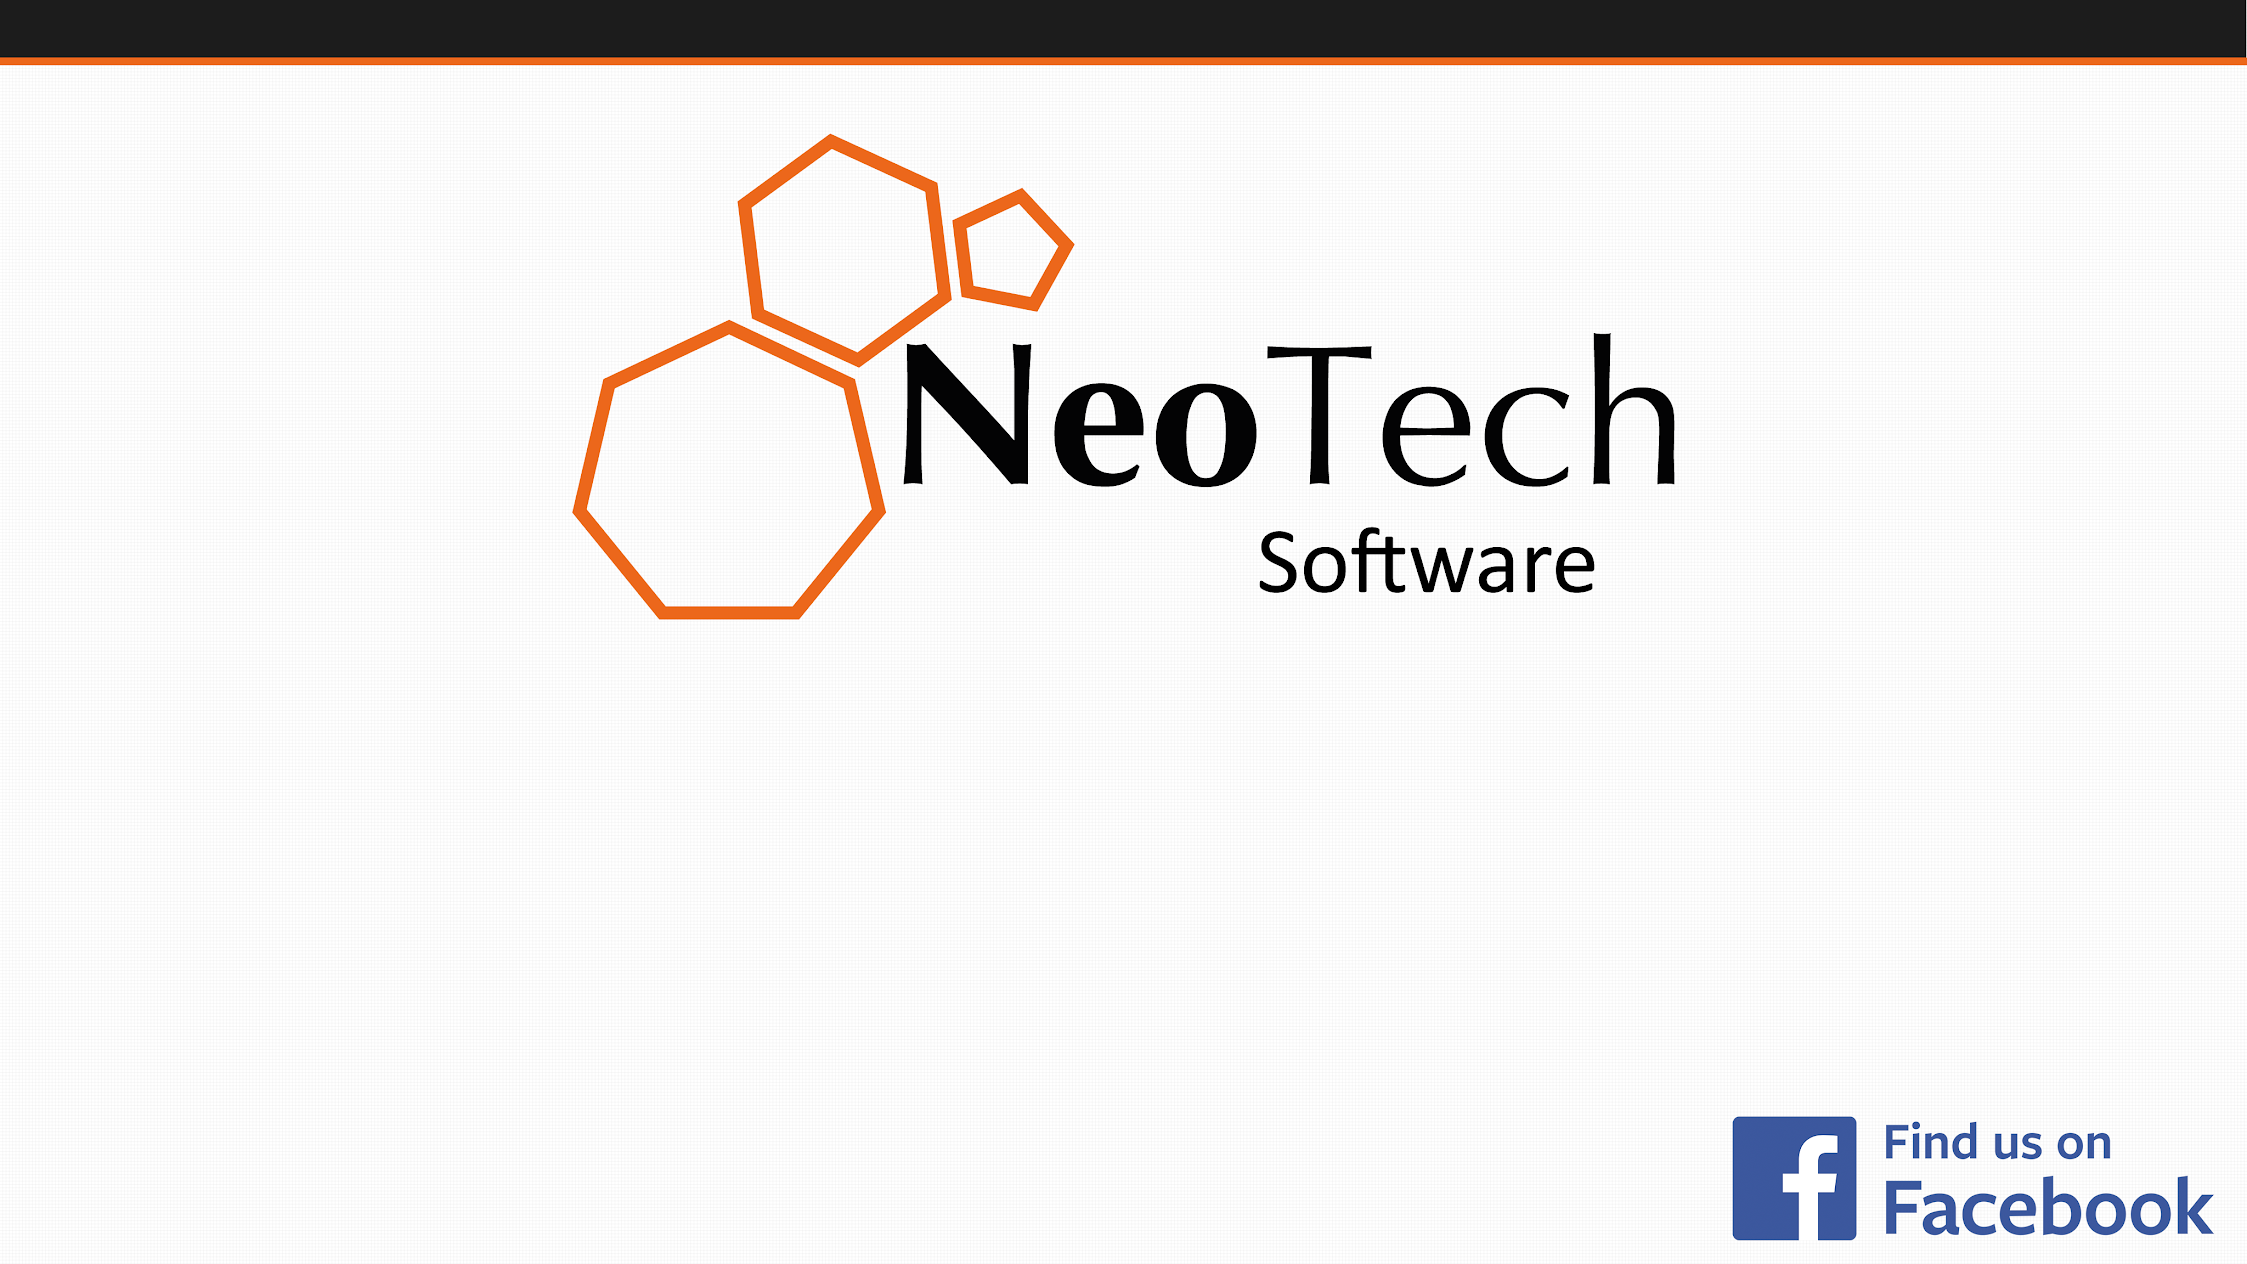 NeoTech Software